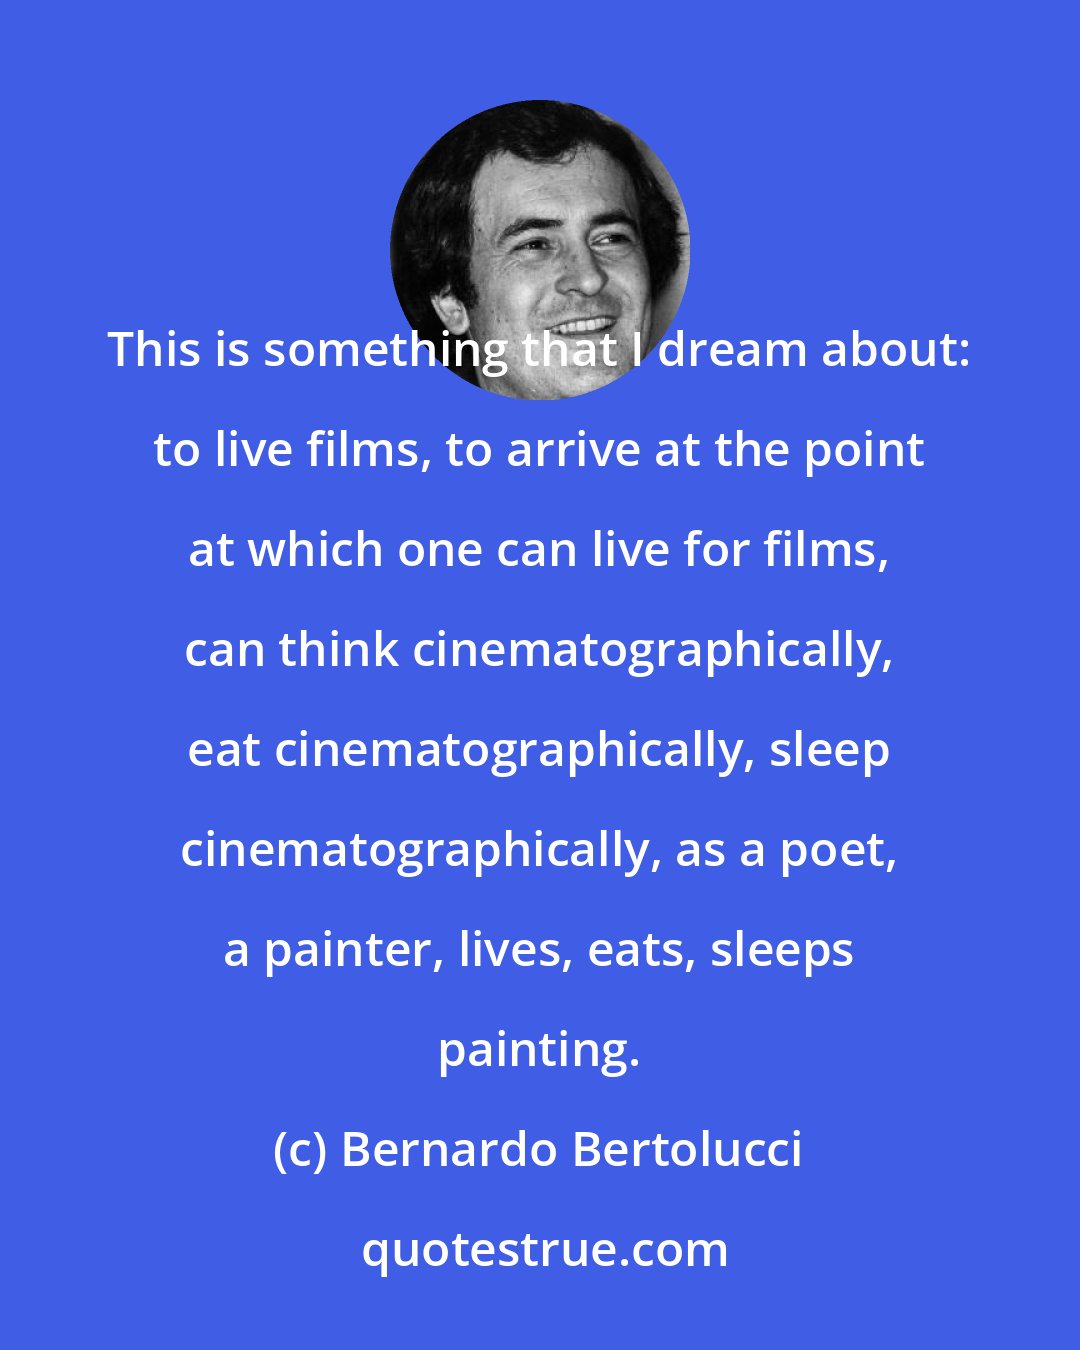 Bernardo Bertolucci: This is something that I dream about: to live films, to arrive at the point at which one can live for films, can think cinematographically, eat cinematographically, sleep cinematographically, as a poet, a painter, lives, eats, sleeps painting.